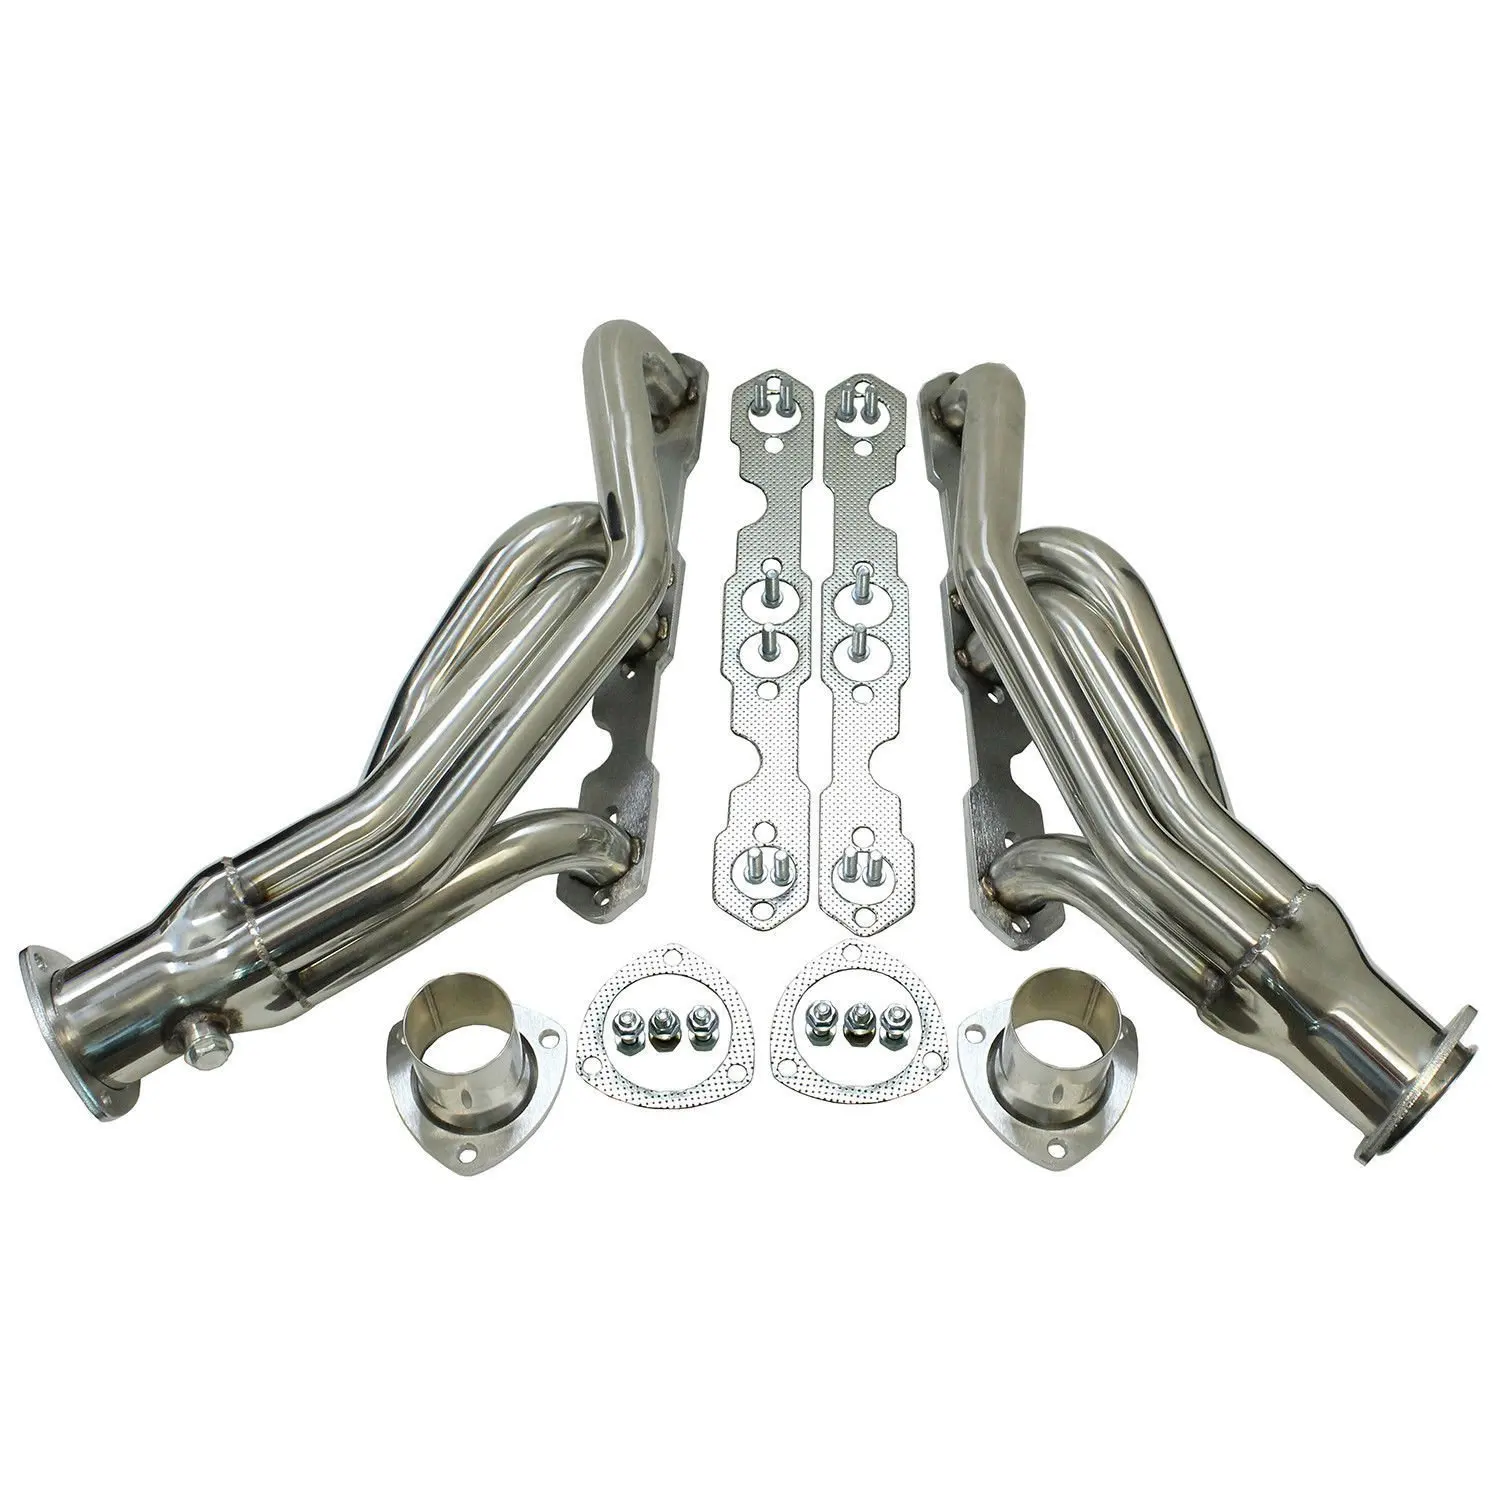 For 1988-1995 SBC Chevy Stainless Steel Truck Headers GMC 1500-2500-3500. 